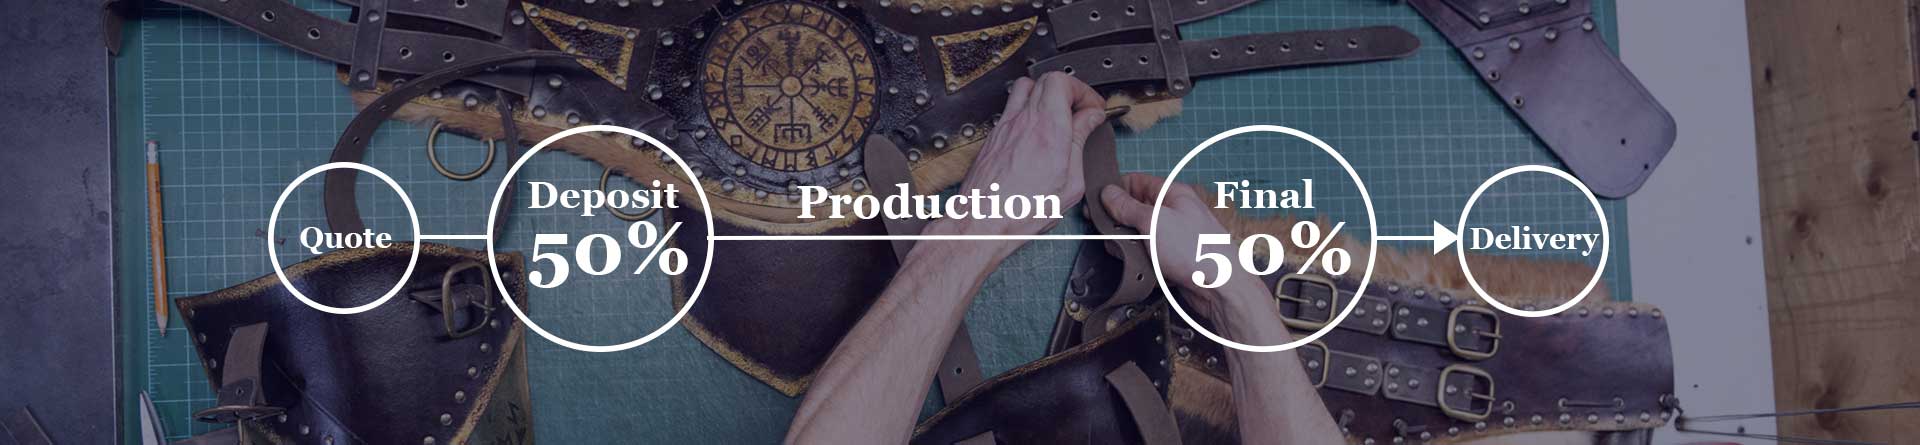 Steps of our custom larp project service: quote, deposit 50% production, final payment and delivery